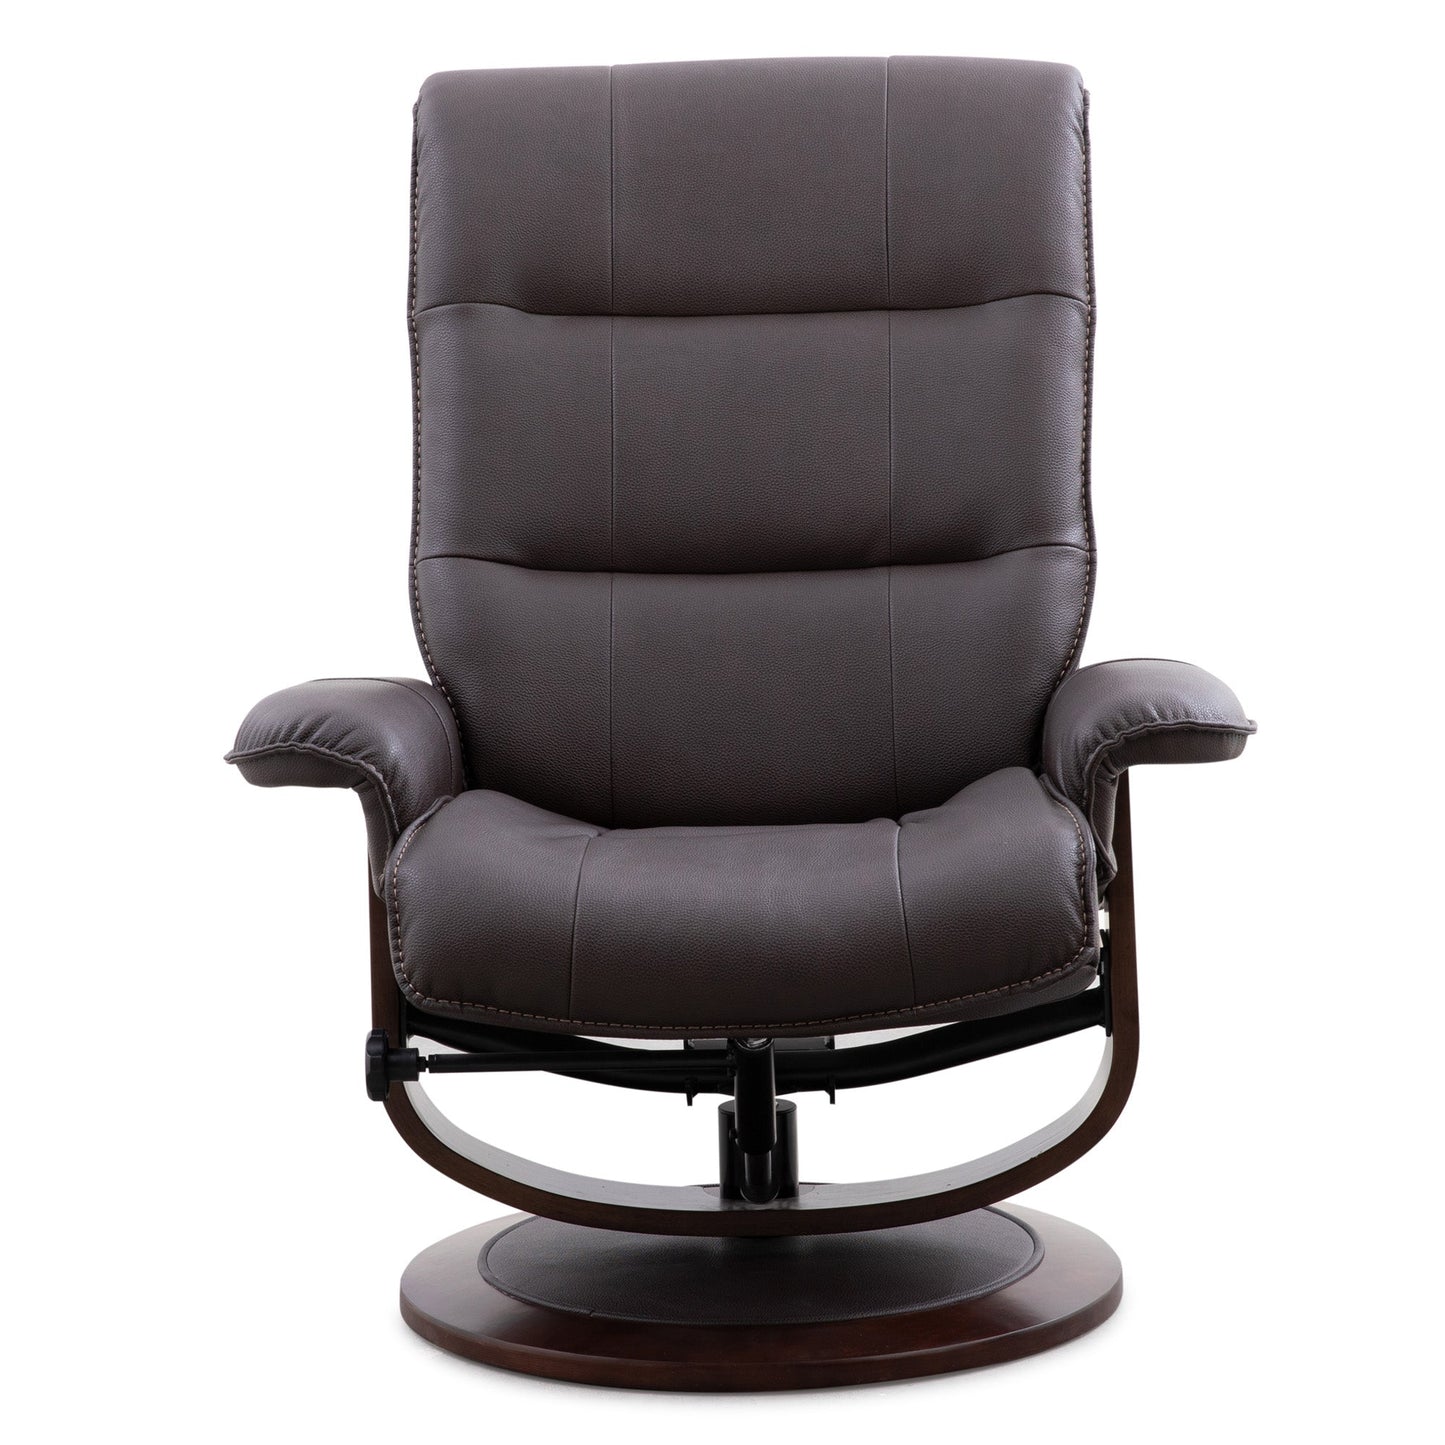 KNIGHT - CHOCOLATE MANUAL RECLINING SWIVEL CHAIR AND OTTOMAN